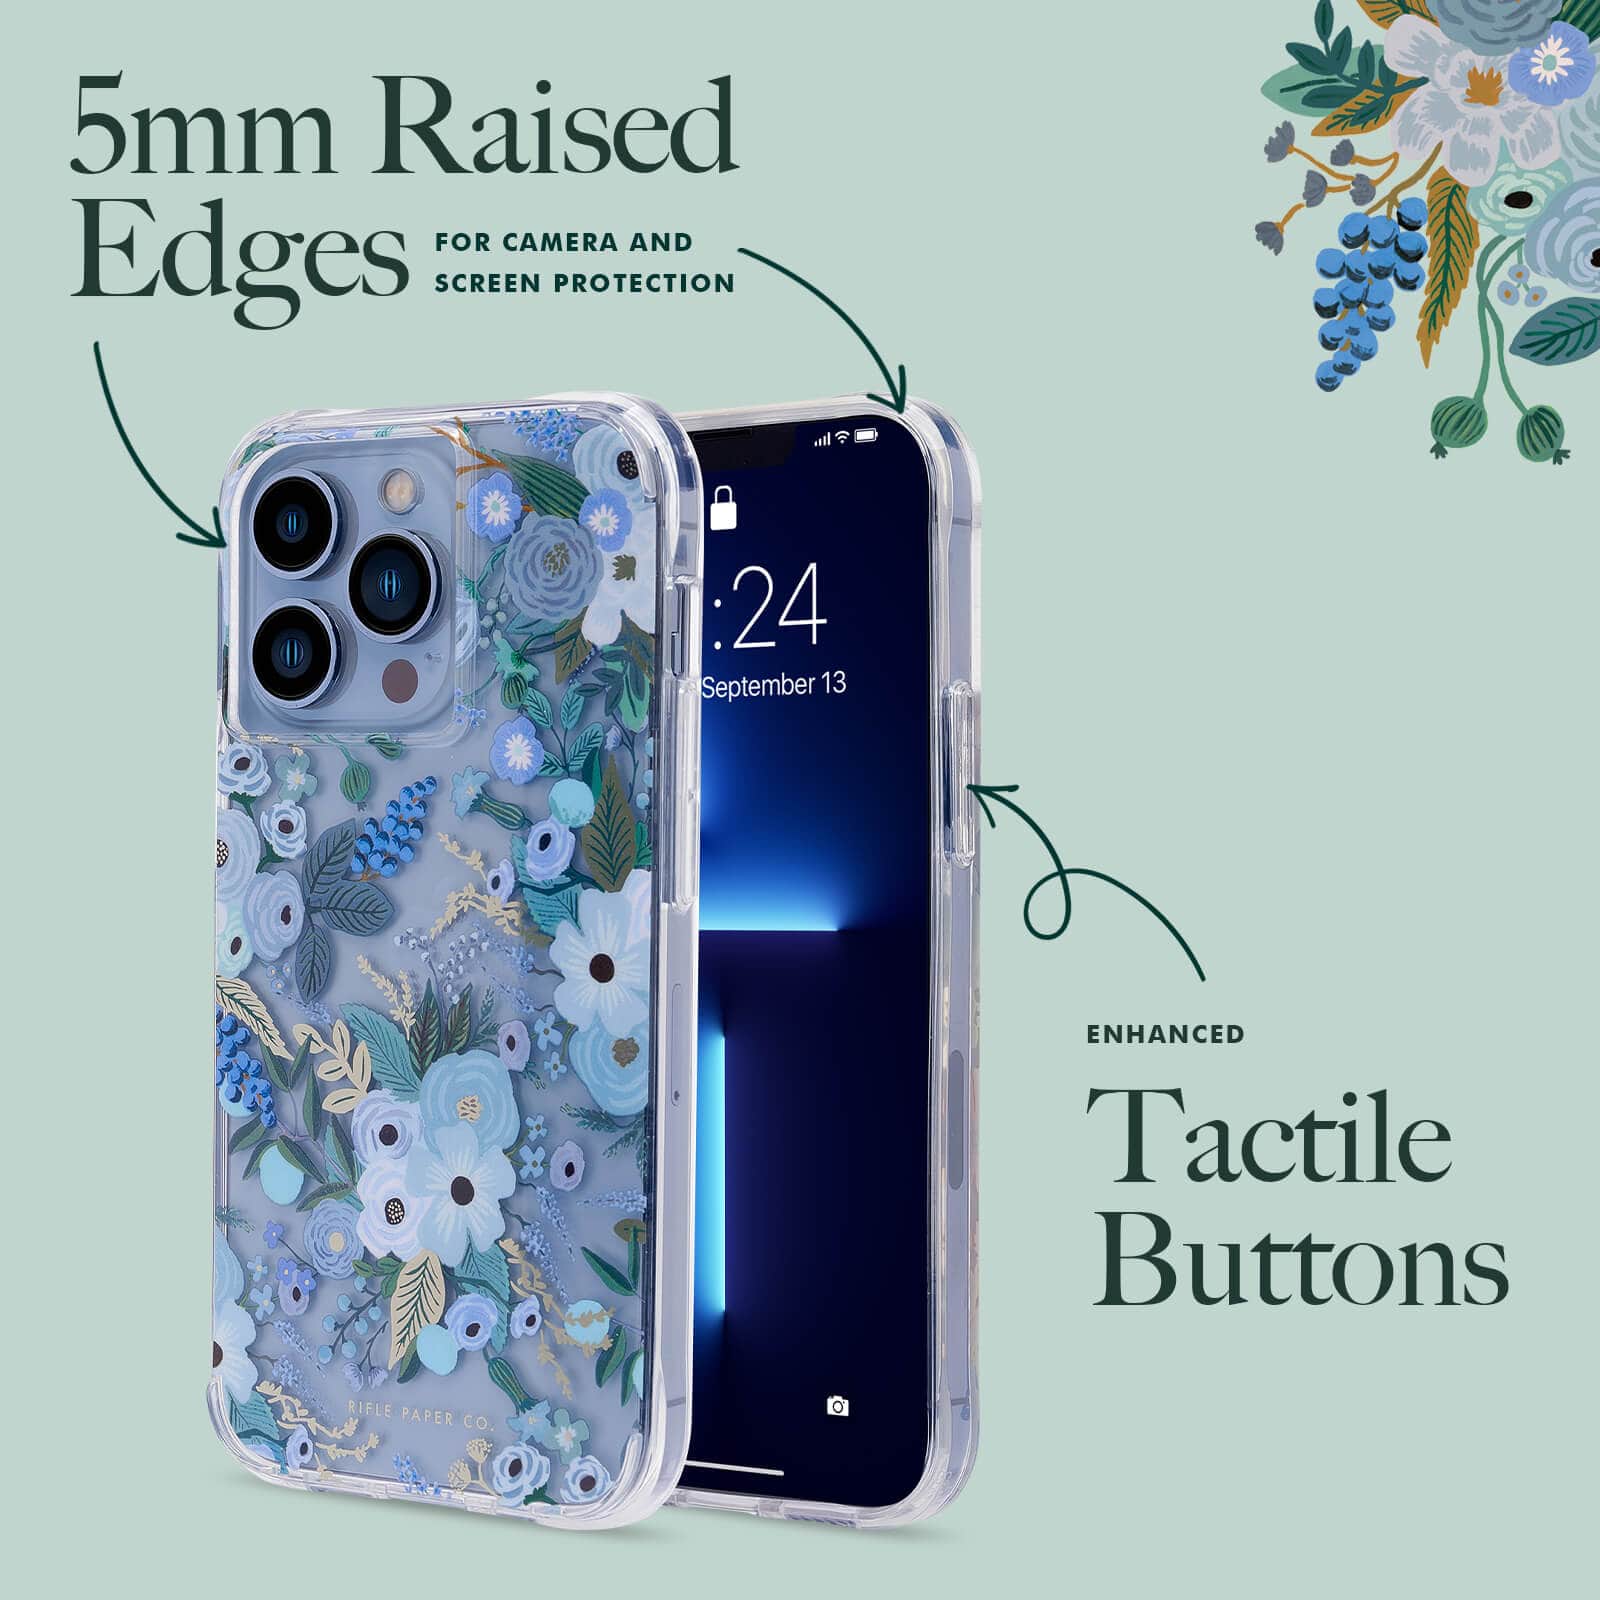 5mm Raised Edges for camera screen protection. Enhanced tactile buttons. color::Garden Party Blue